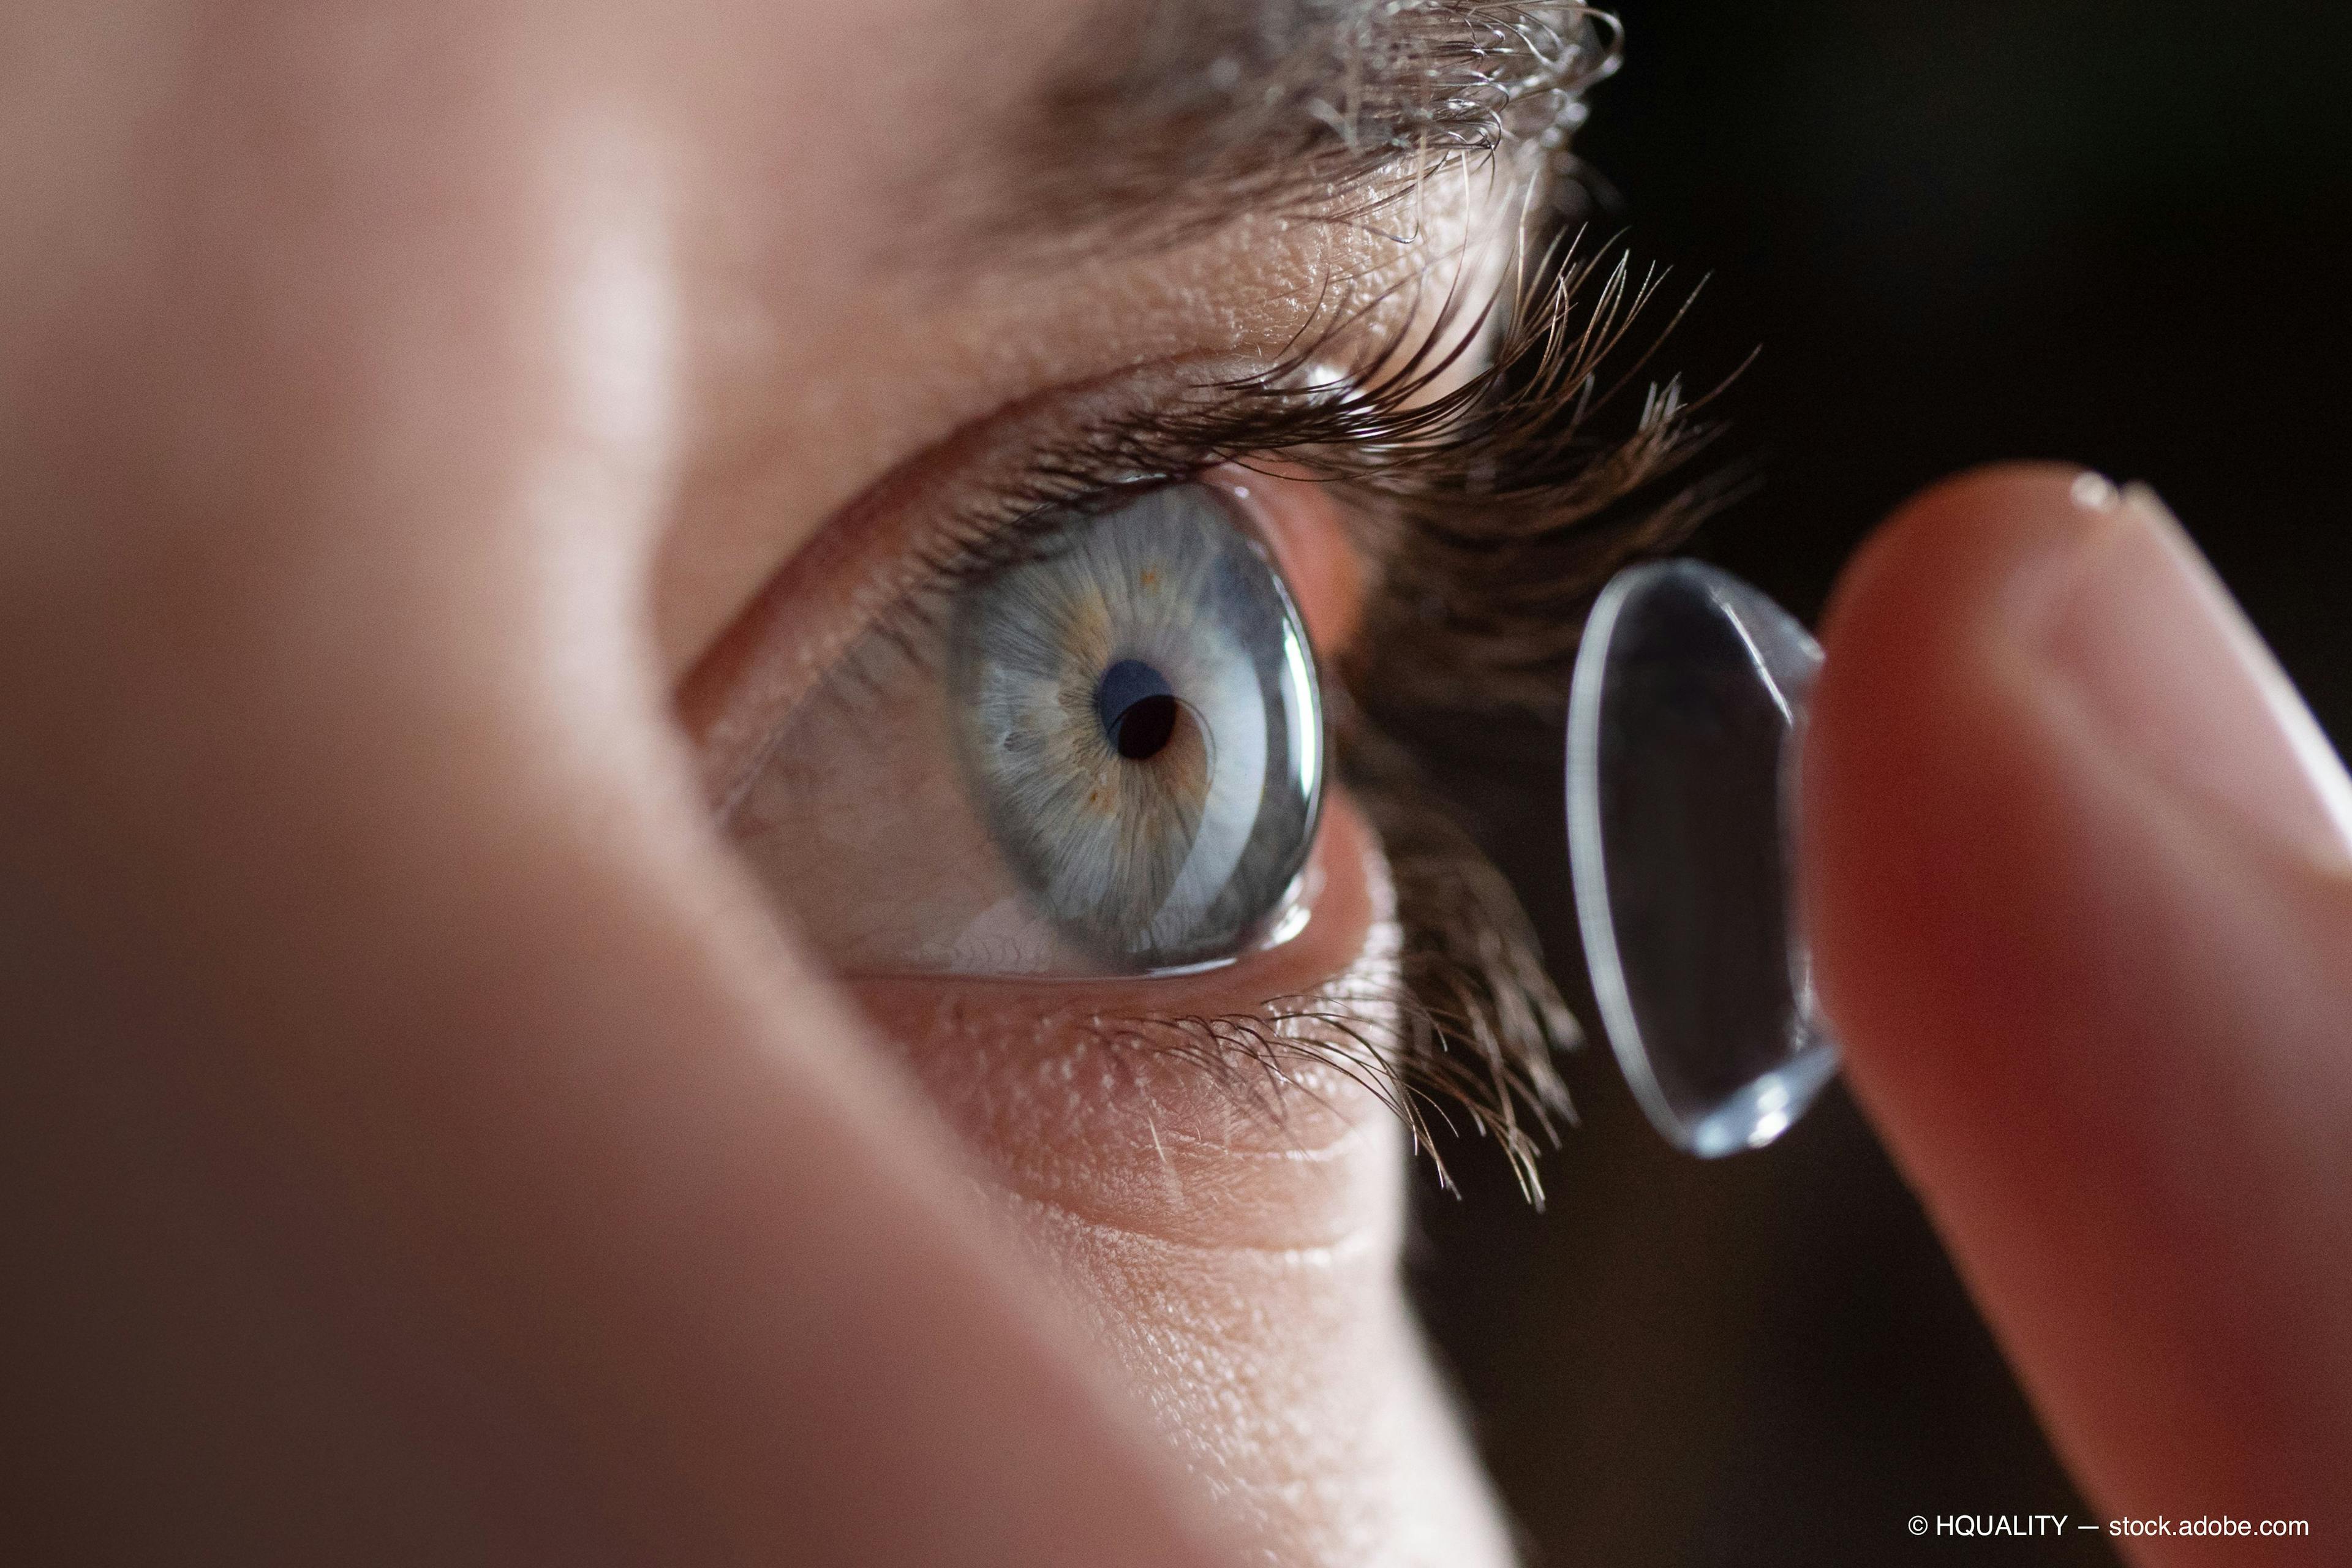 Artificial tears offers a path to contact lens comfort